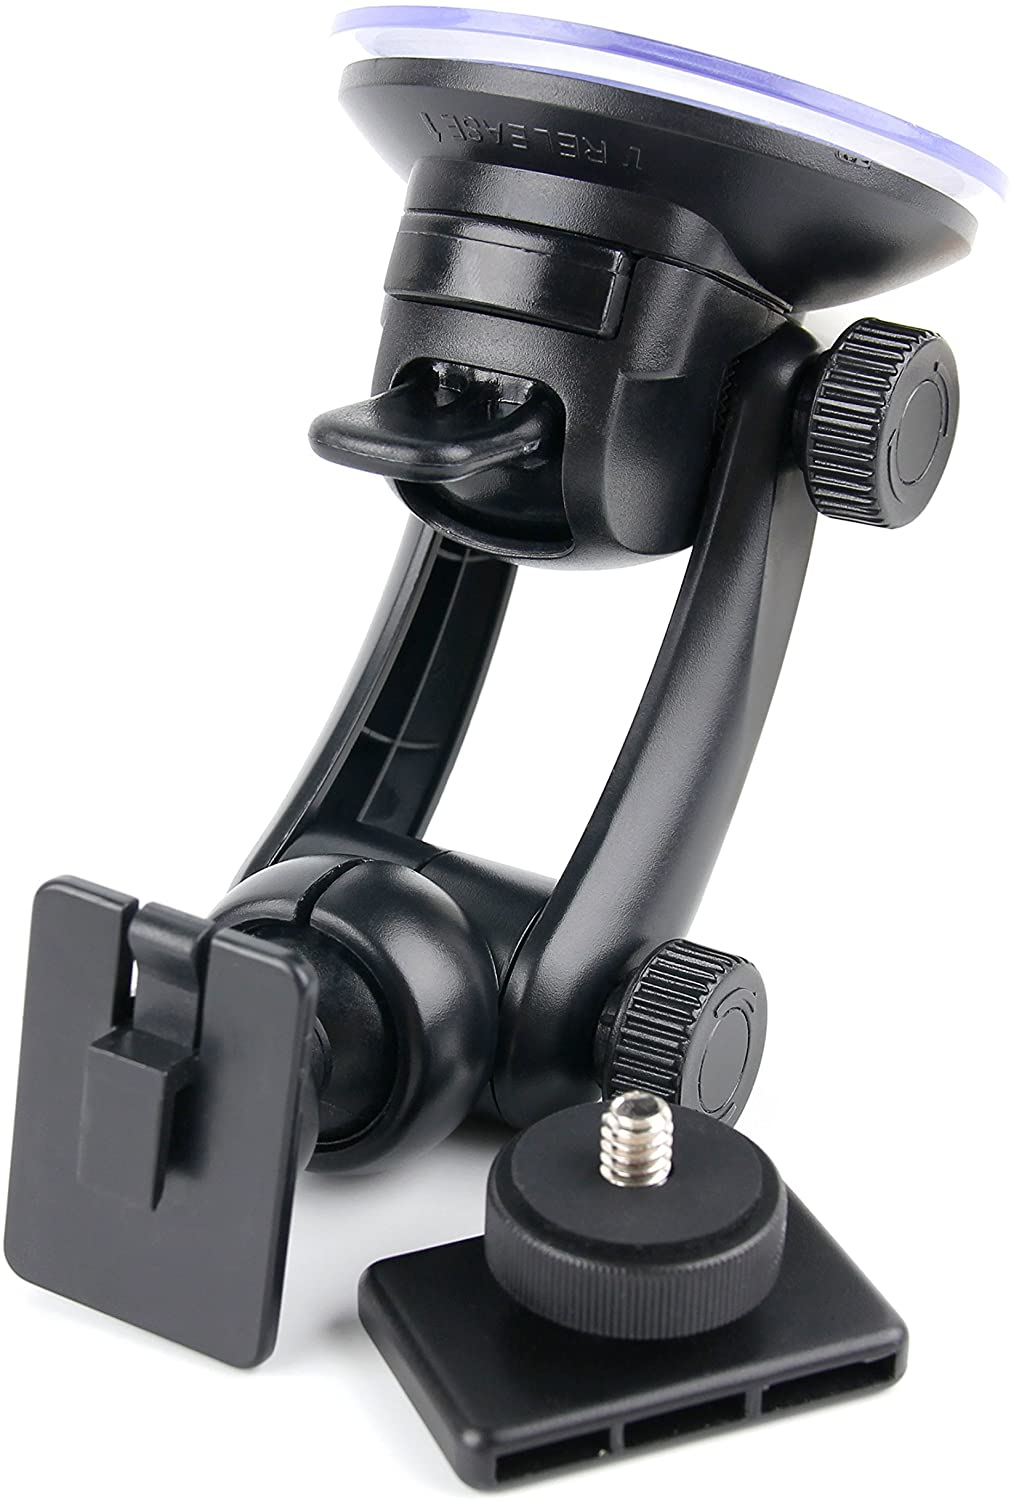 DURAGADGET in-Car Windscreen & Dashboard Suction Mount - Compatible with The New Transcend DrivePro